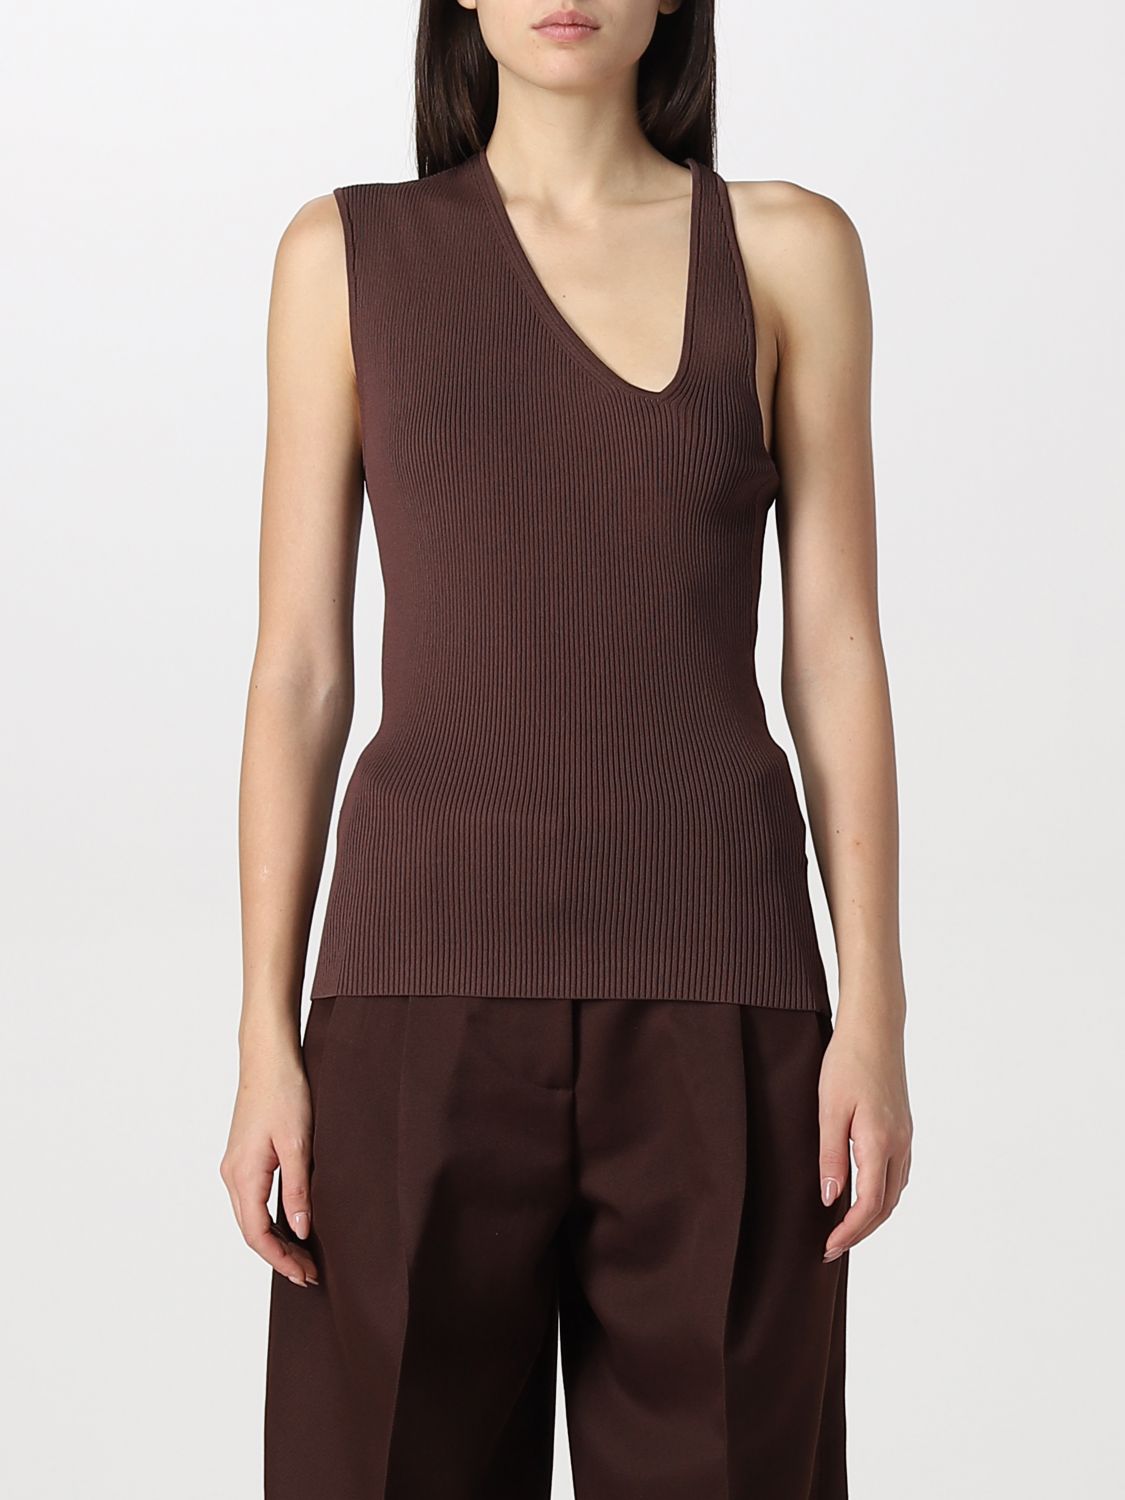 Top Rohe: Rohe top for woman brown 1